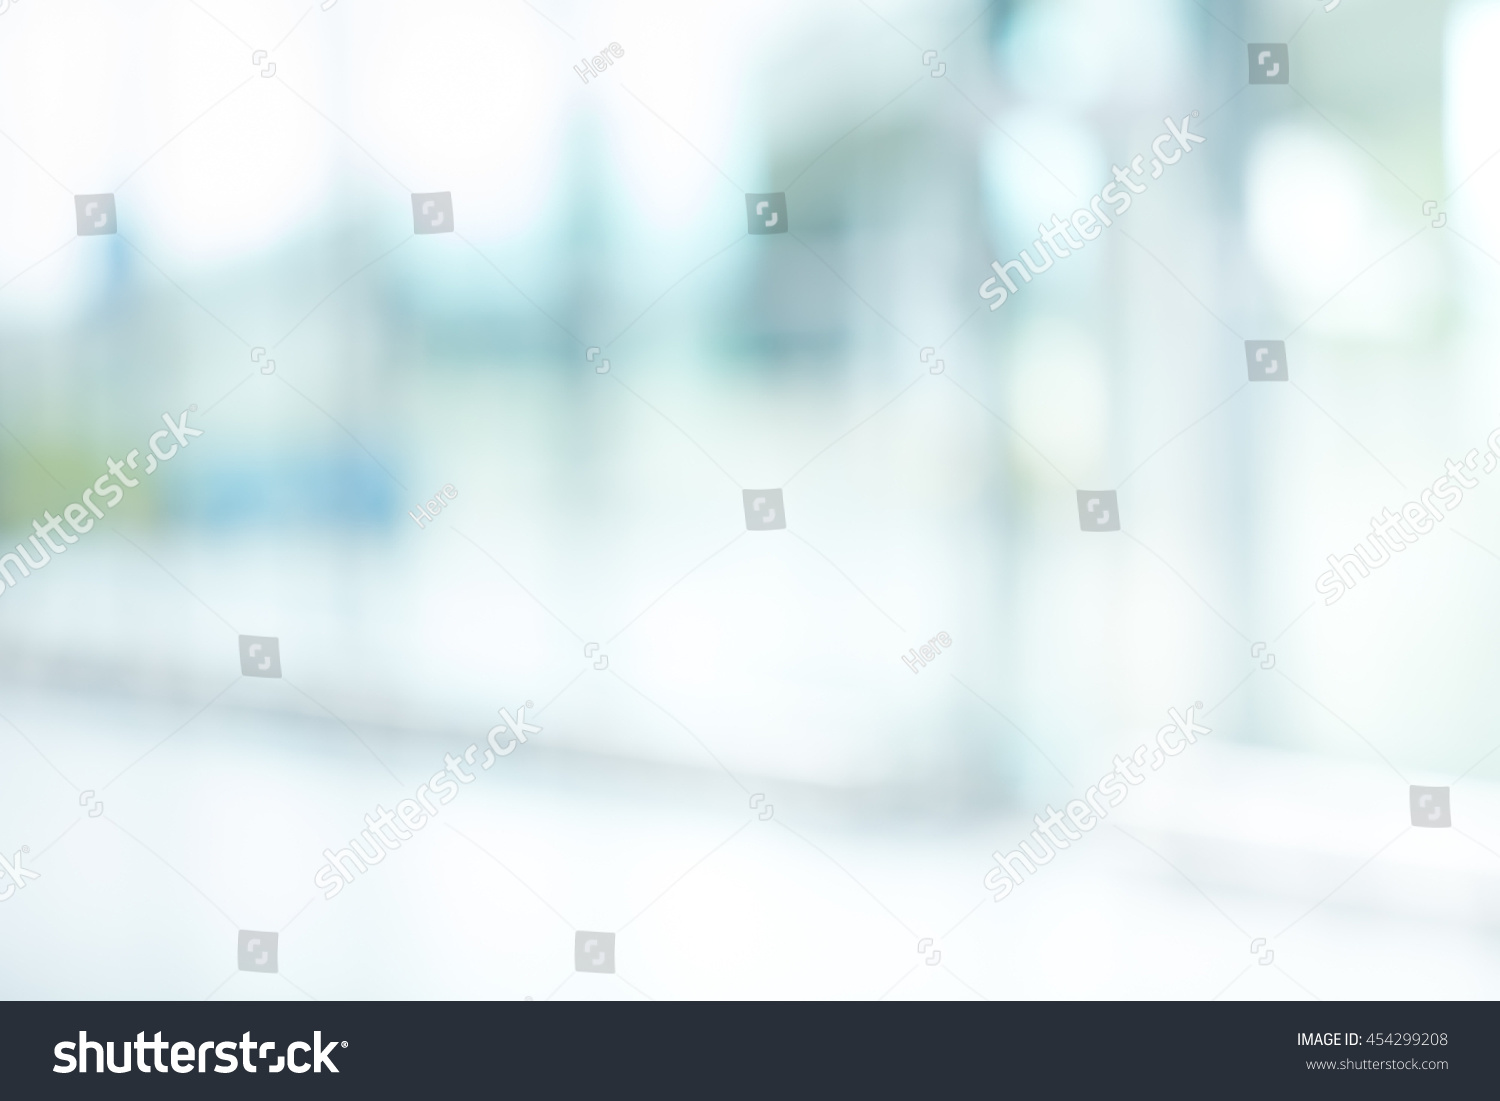 BLURRED OFFICE BACKGROUND #454299208